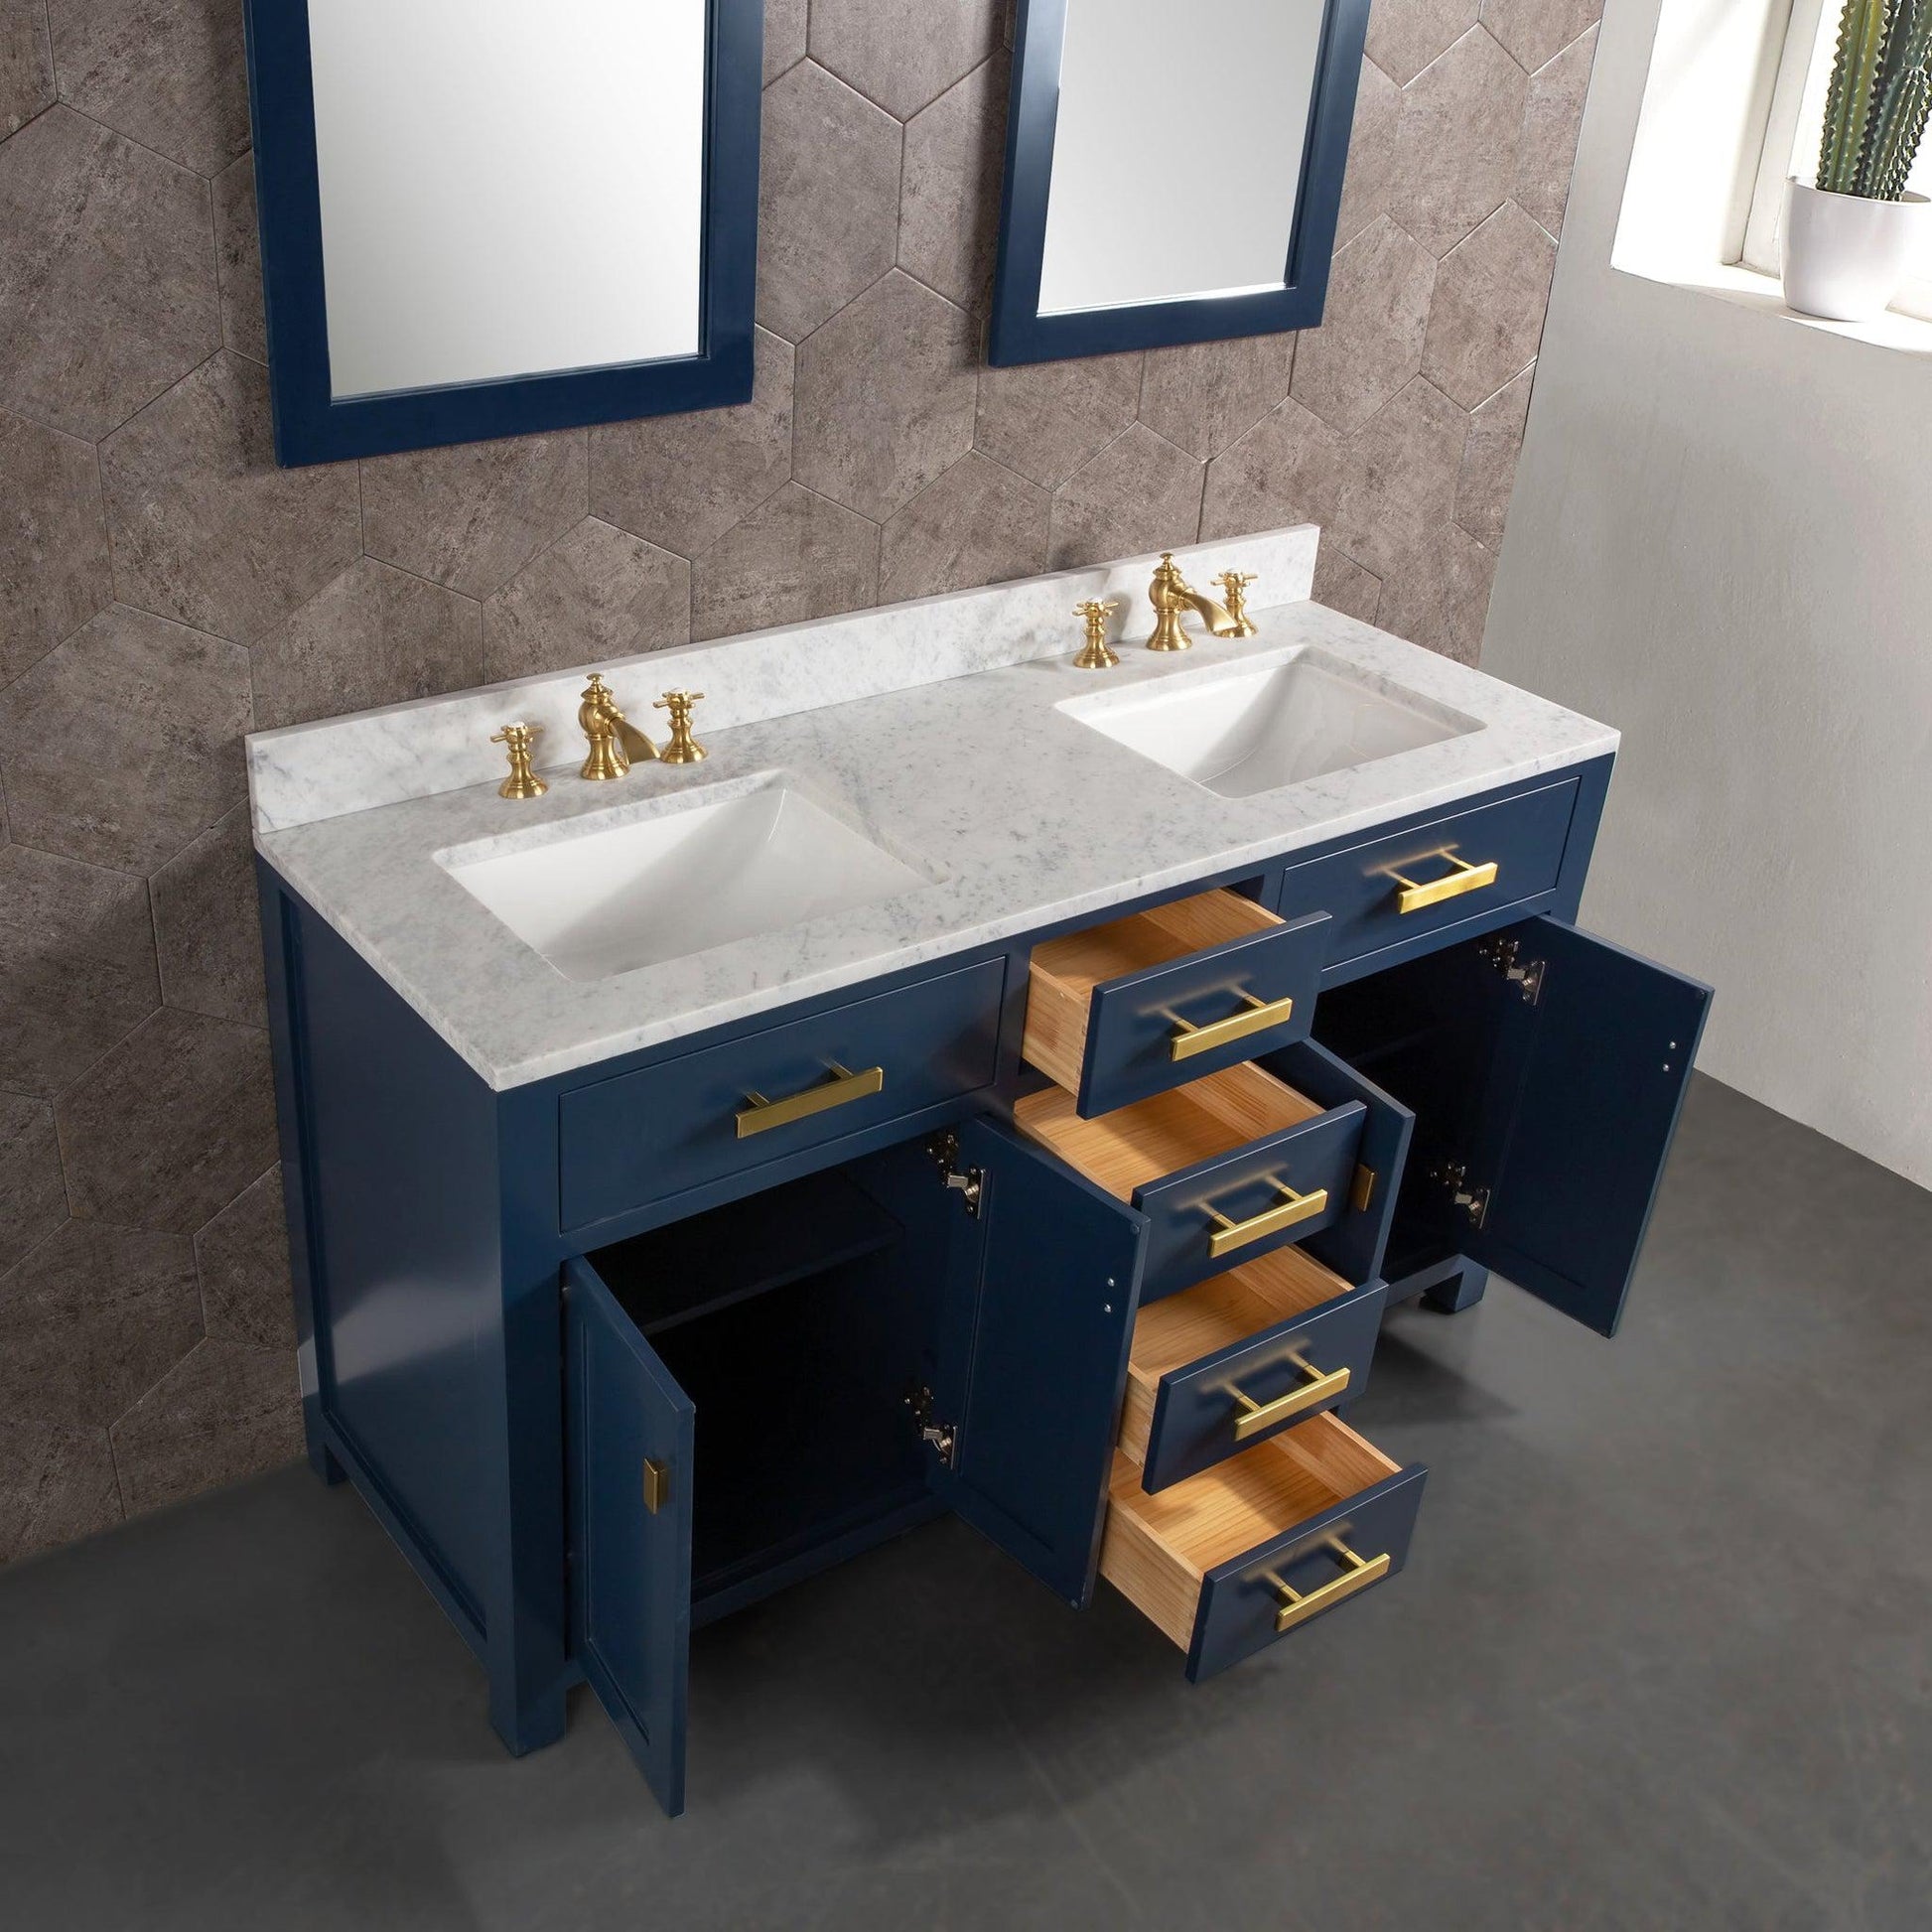 Water Creation Madison 60" Double Sink Carrara White Marble Vanity In Monarch BlueWith F2-0013-06-FX Lavatory Faucet(s)